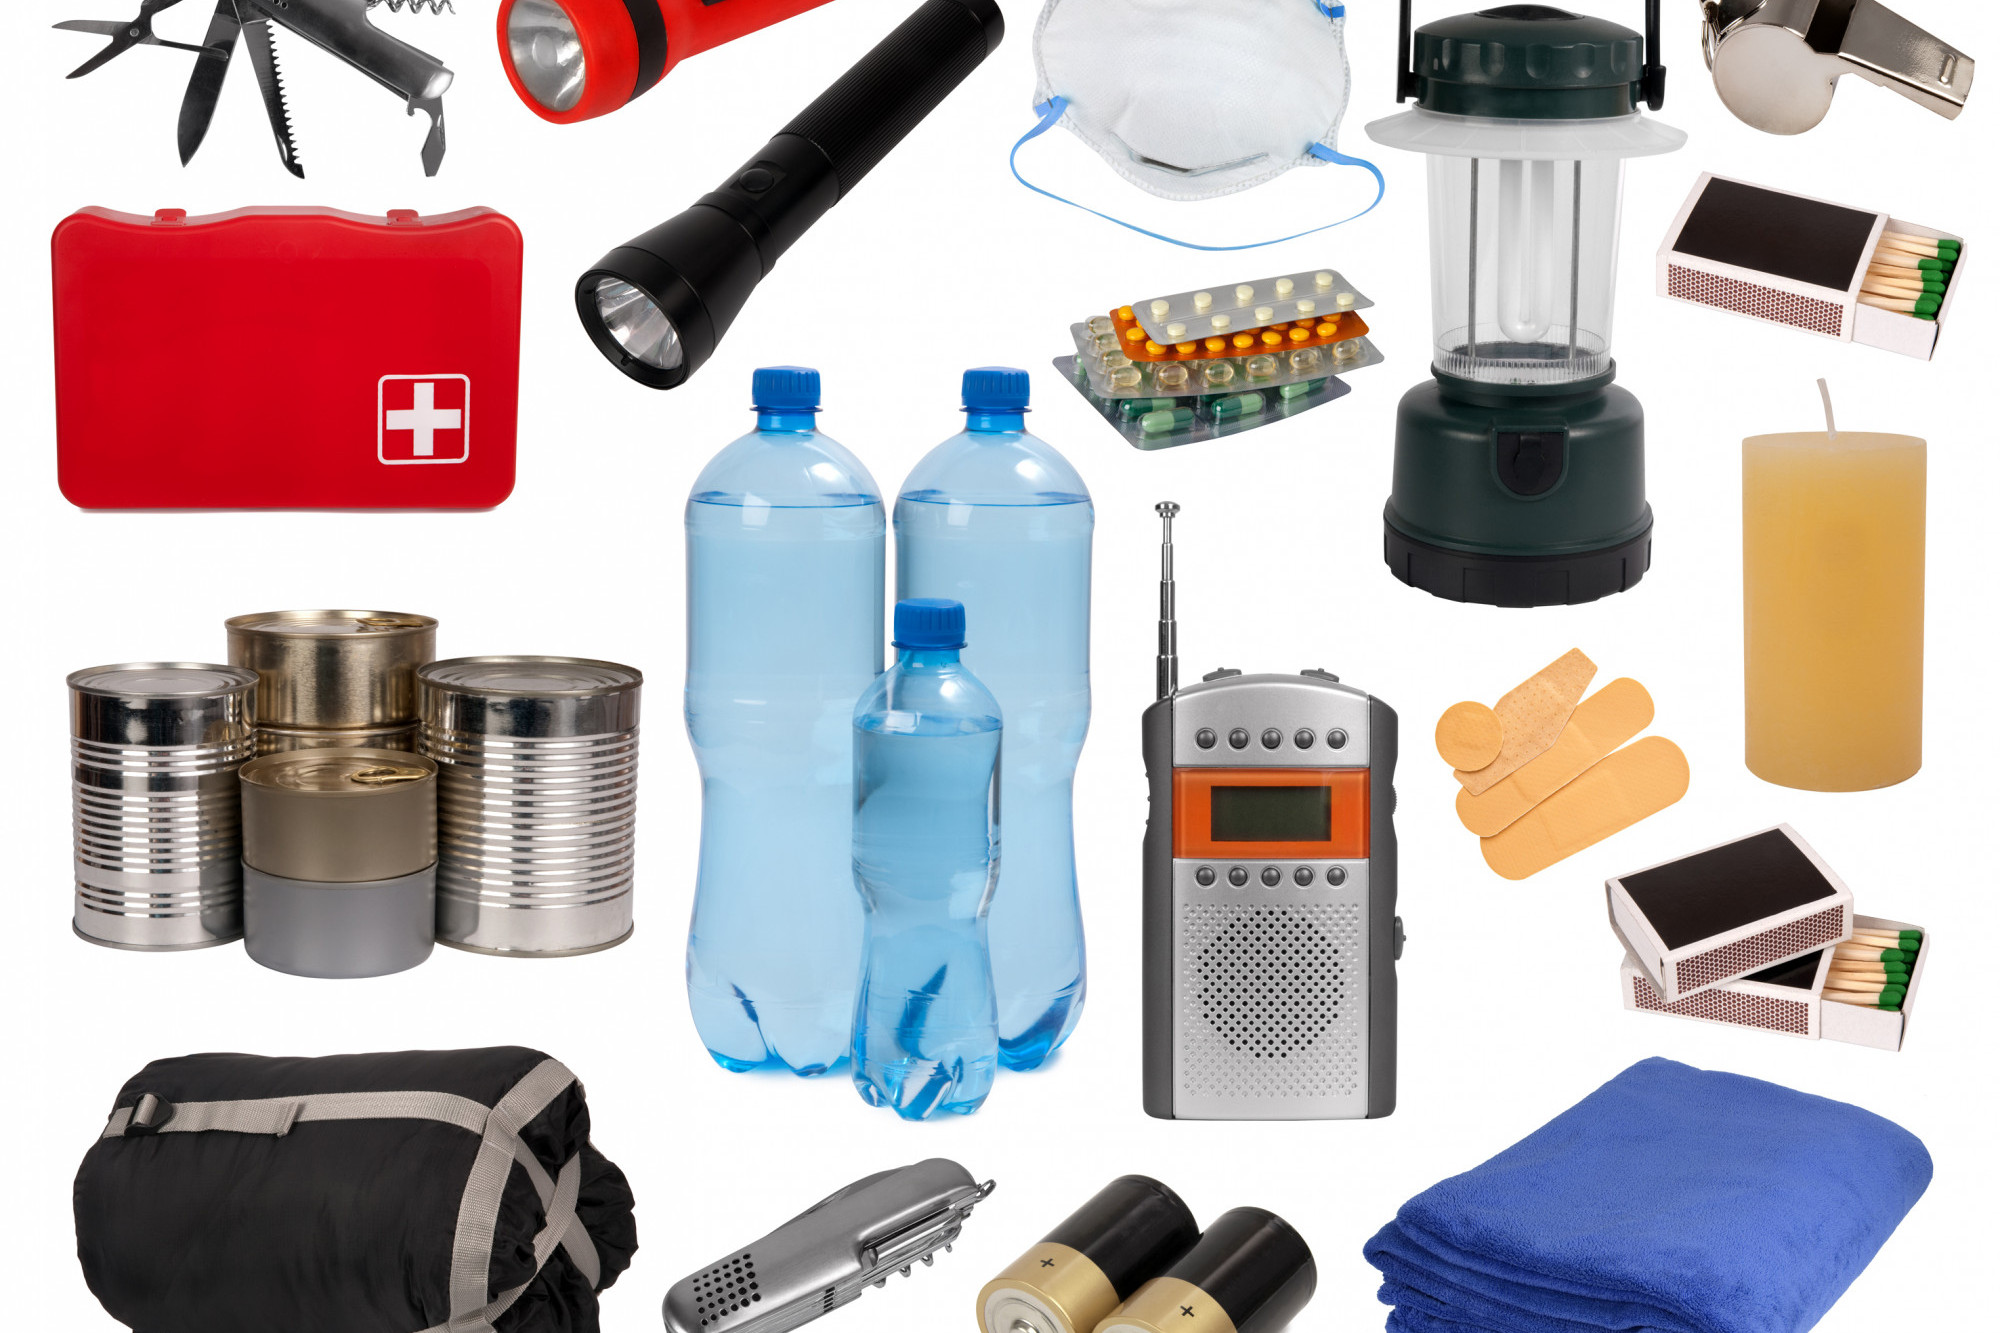 Cyclone Preparation: Get your supplies ready - feature photo